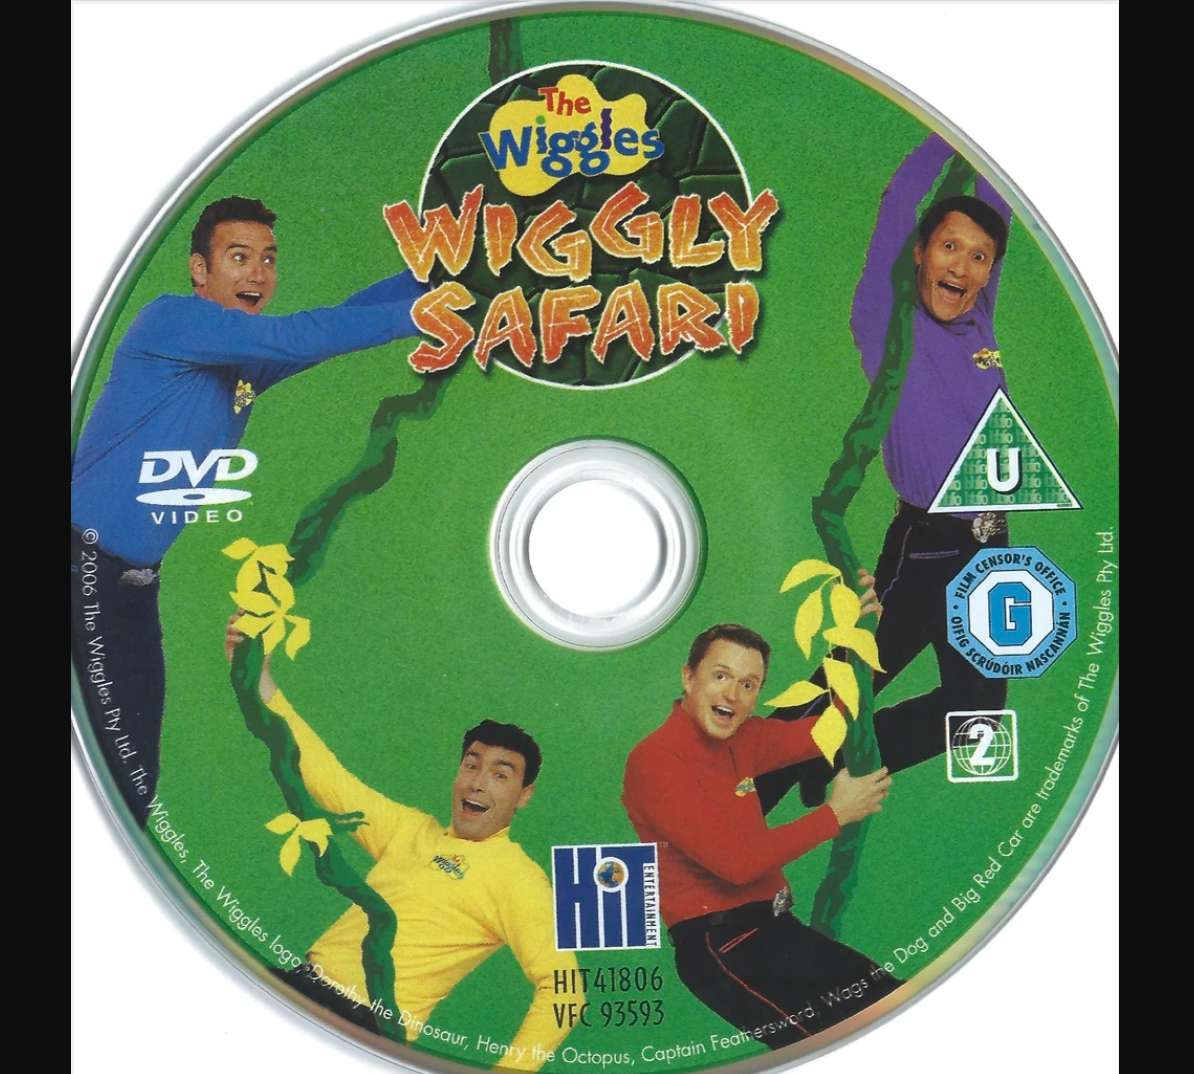 Wiggly Safari Disc 2000 jigsaw puzzle online